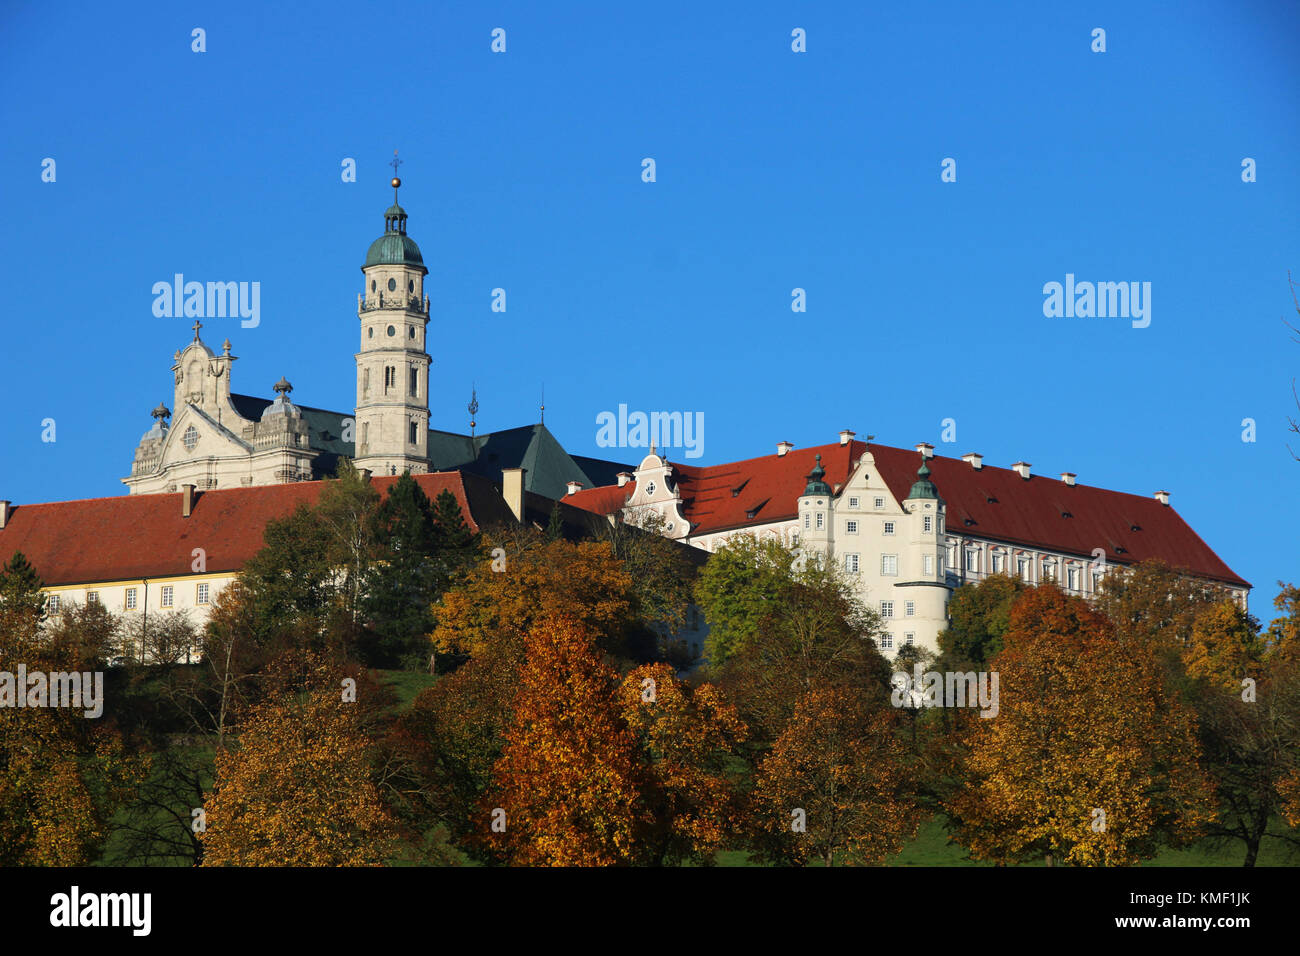 Home Neres, cloister, abbey, east nightmare, east nightmare circle, church, Catholic, place of interest, nightmare, in Swabian, Neresheim, Kloster, Ab Stock Photo